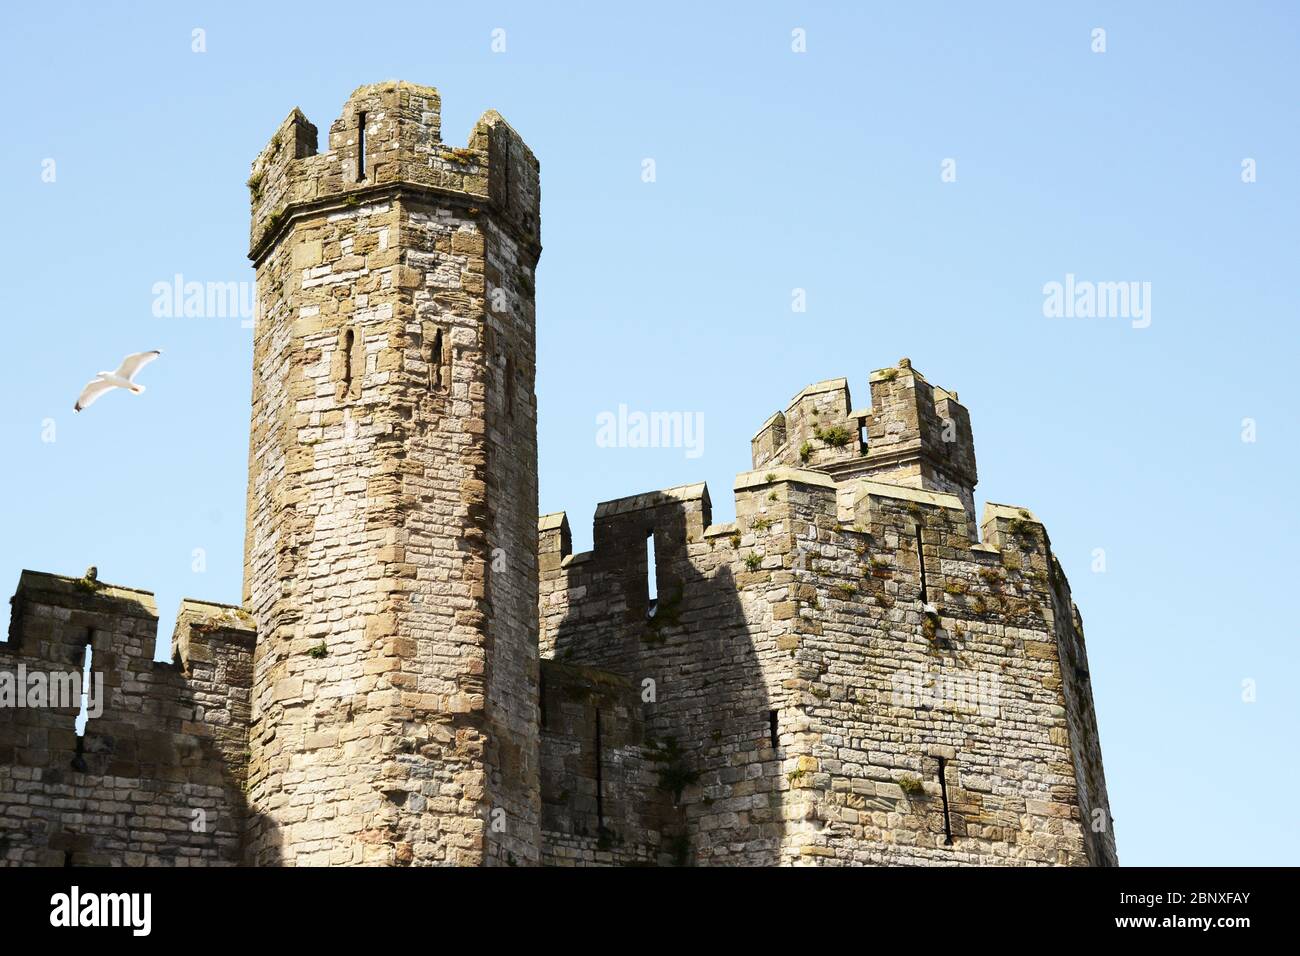 The towers at Caernarfon castle in North Wales Stock Photo